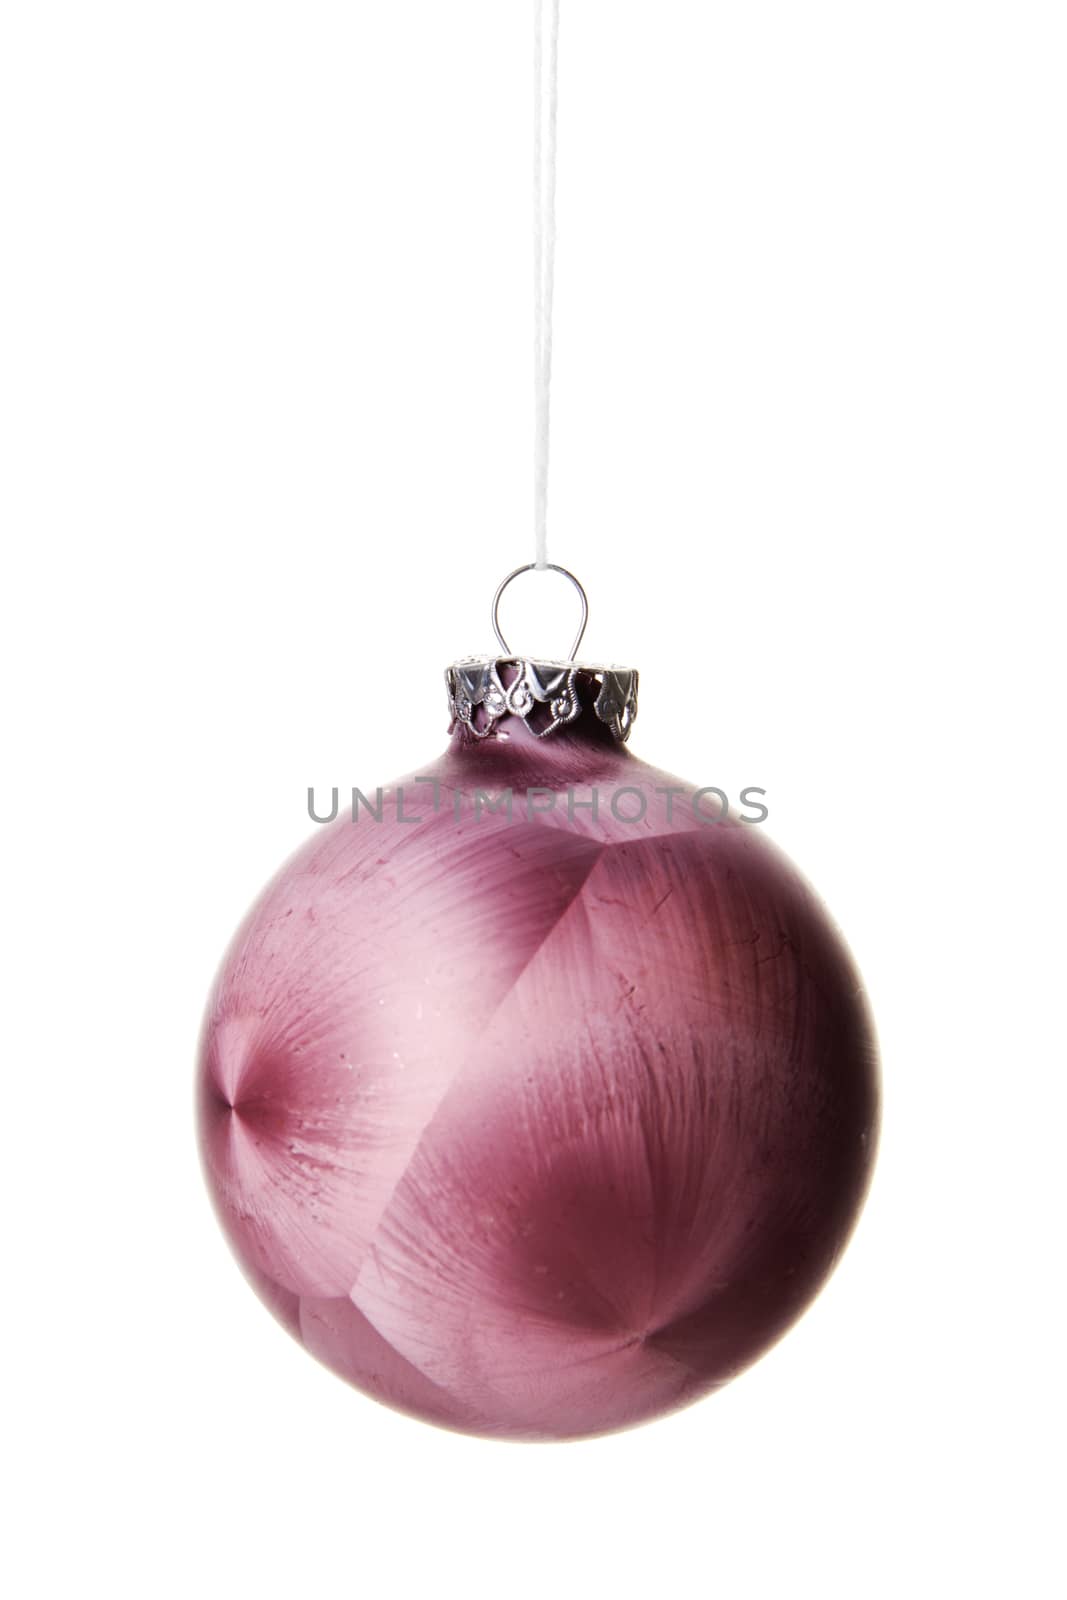 christmas ornament violet by Tomjac1980